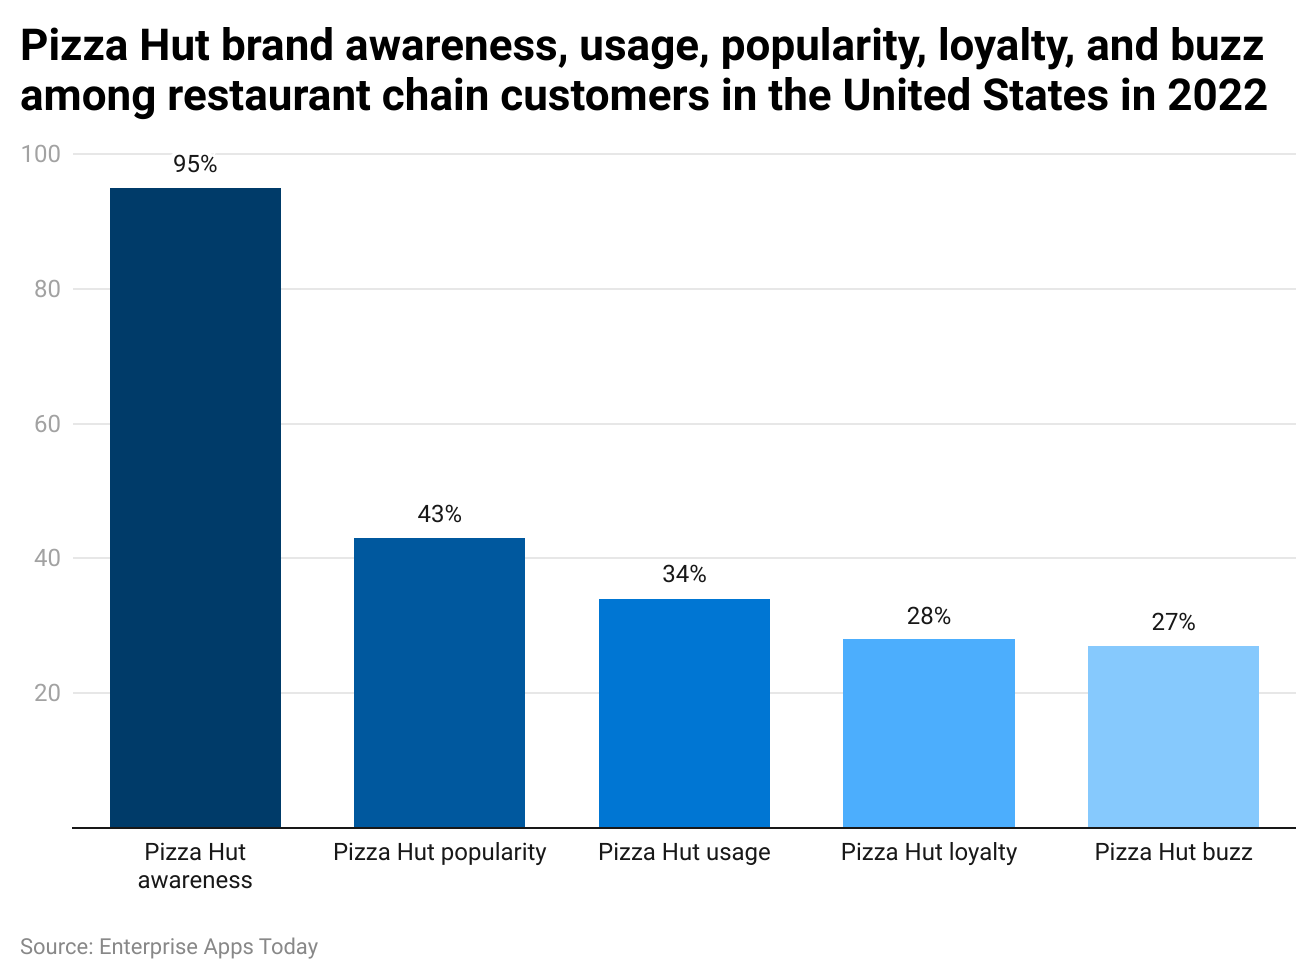 pizza-hut-brand-awareness-usage-popularity-loyalty-and-buzz-among-restaurant-chain-customers-in-the-united-states-in-2022